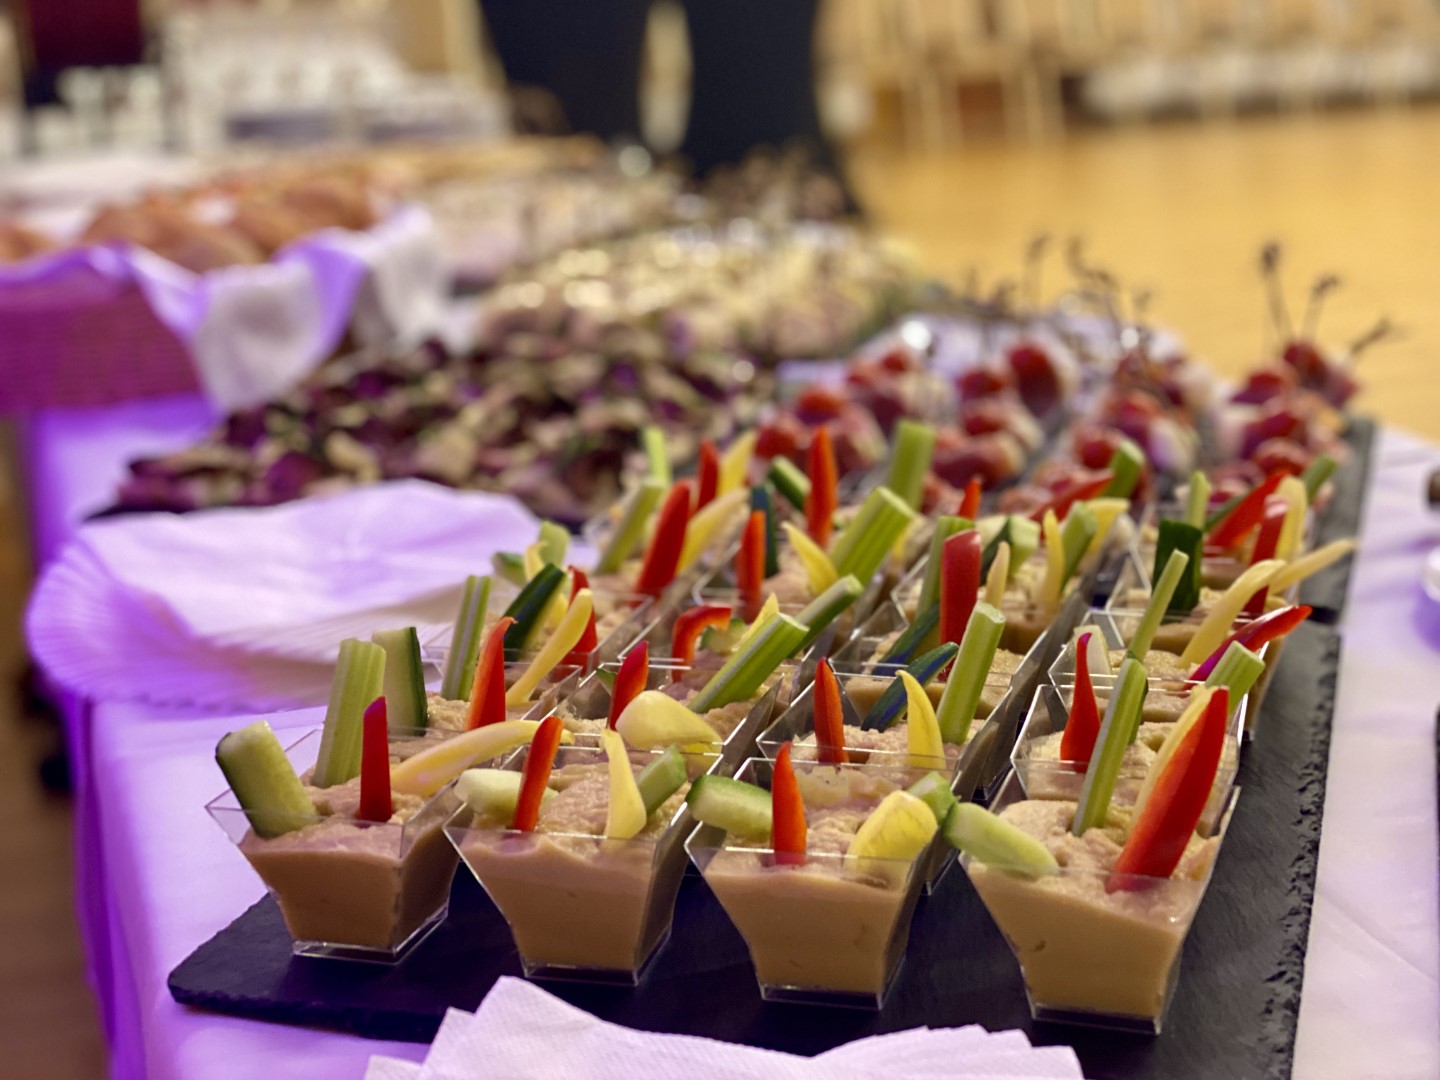 event catering